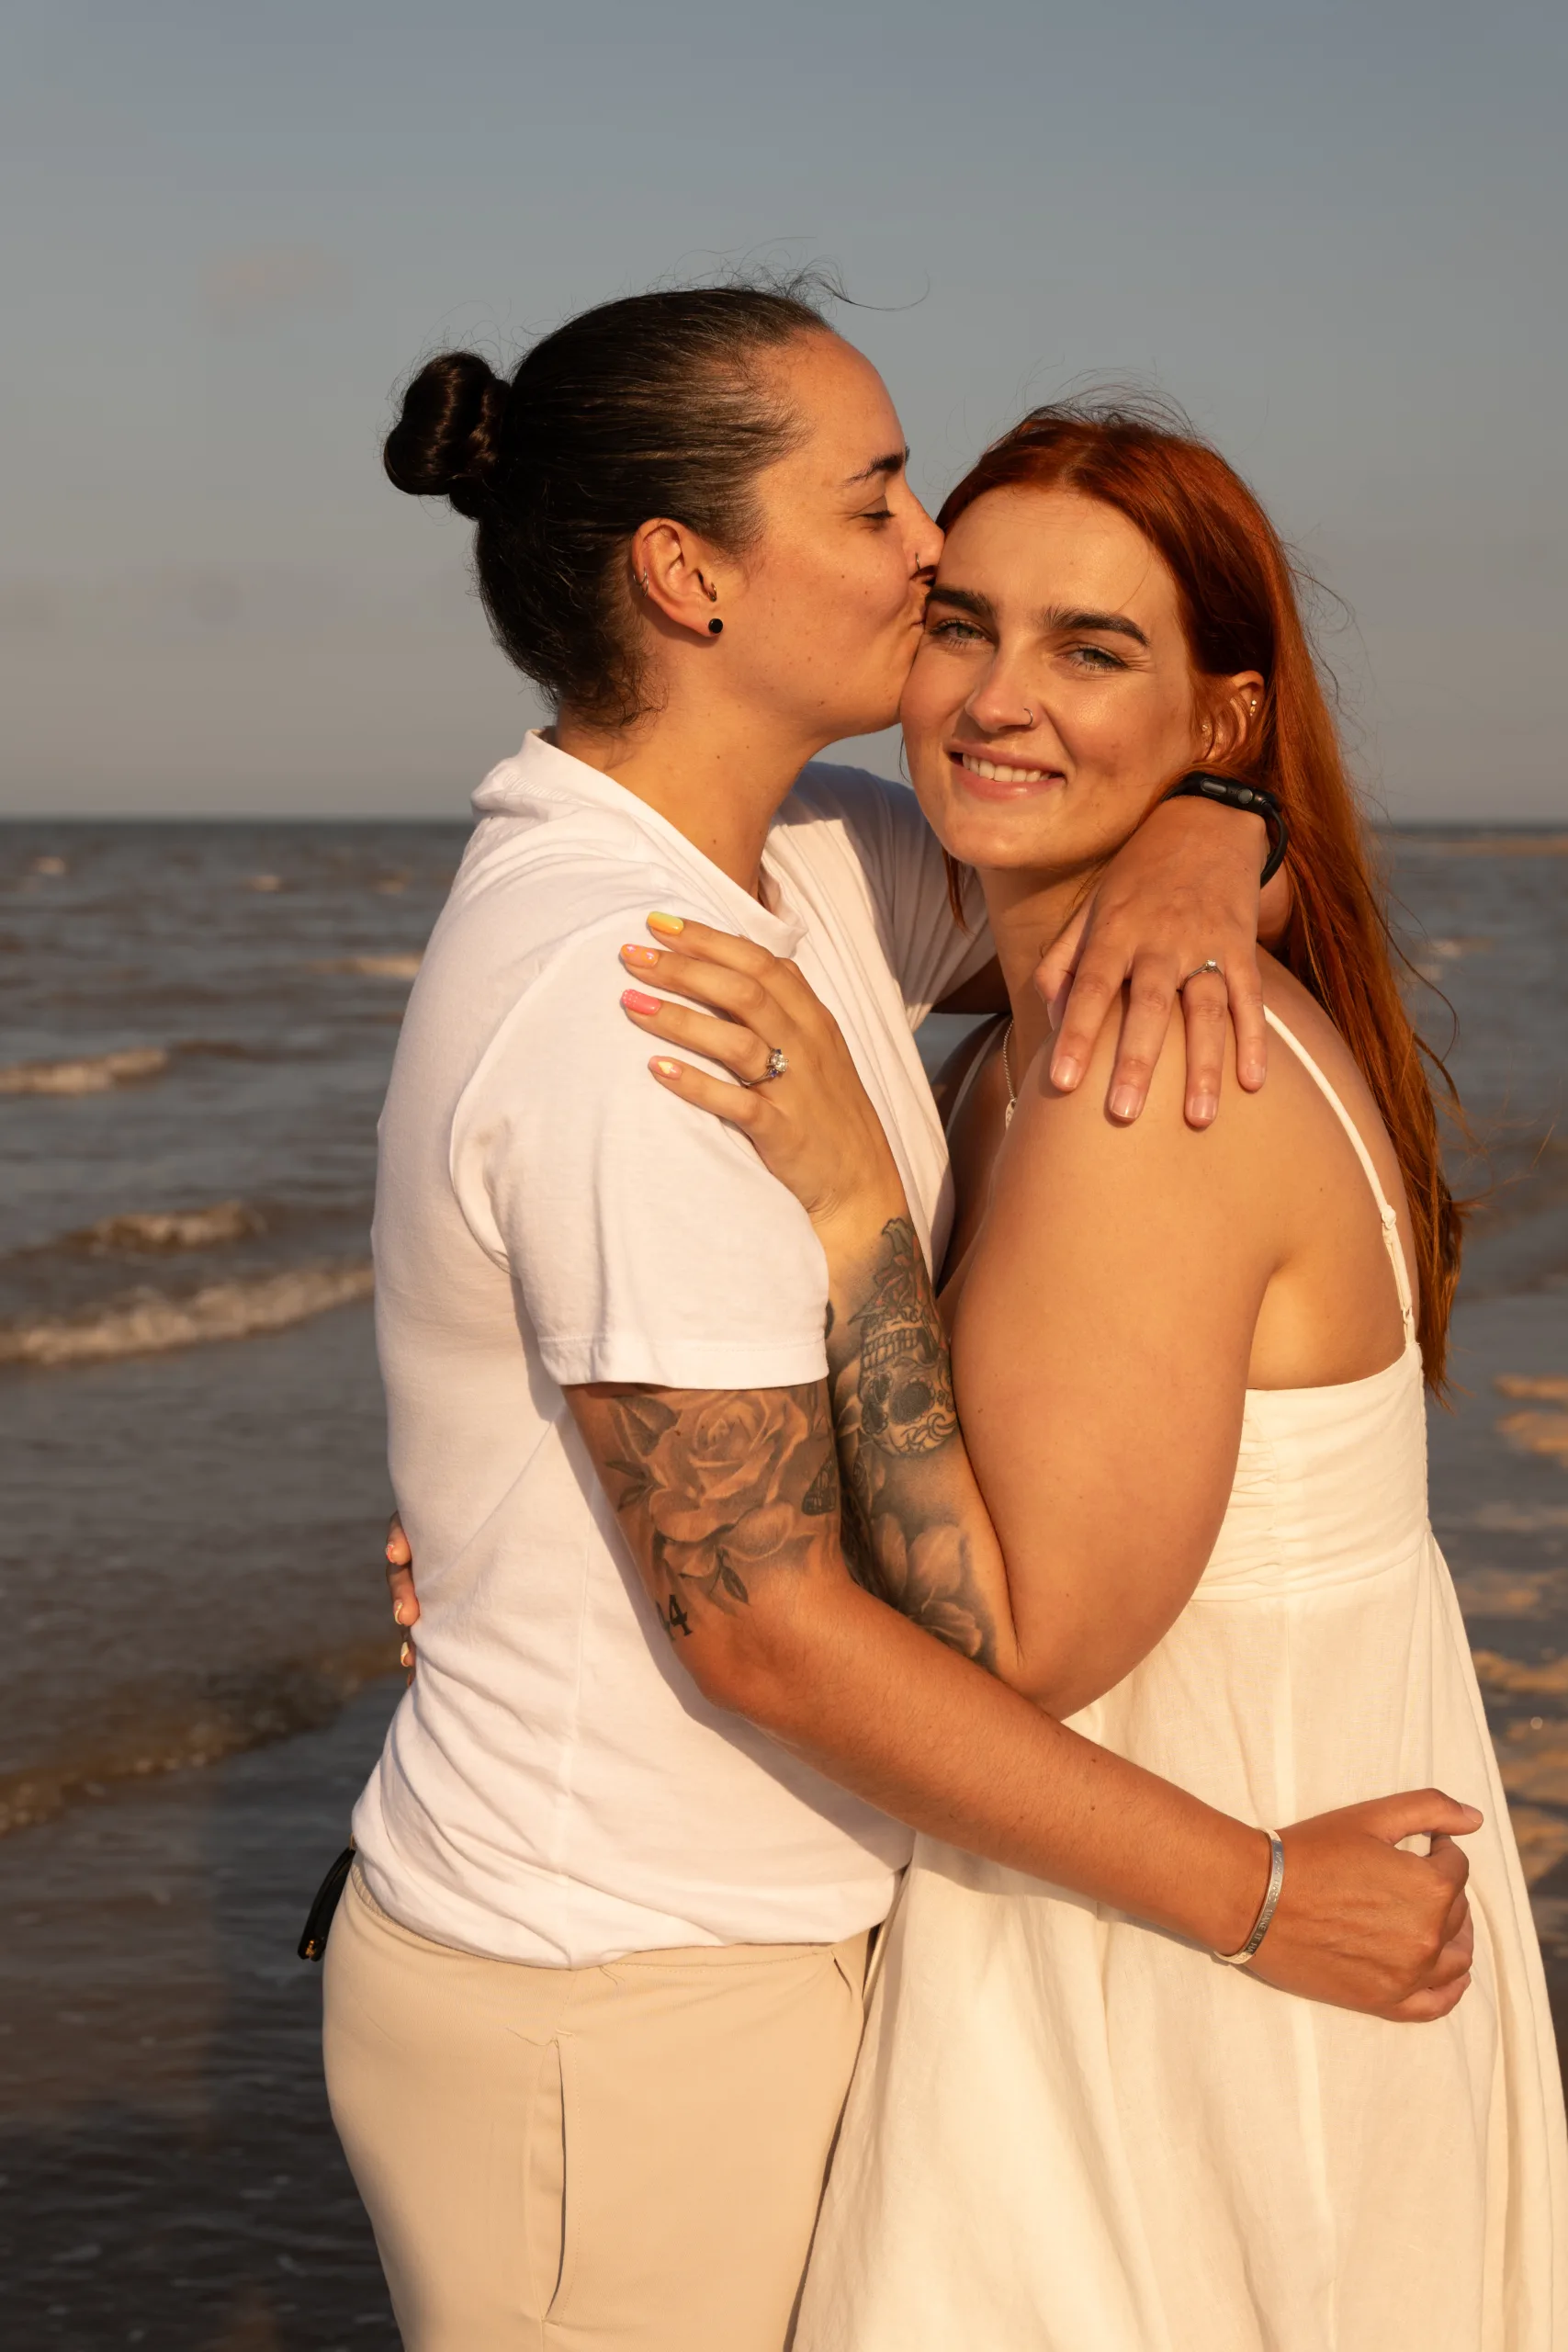 Two women embracing on the sandy shores of Cleethorpes, captured beautifully.